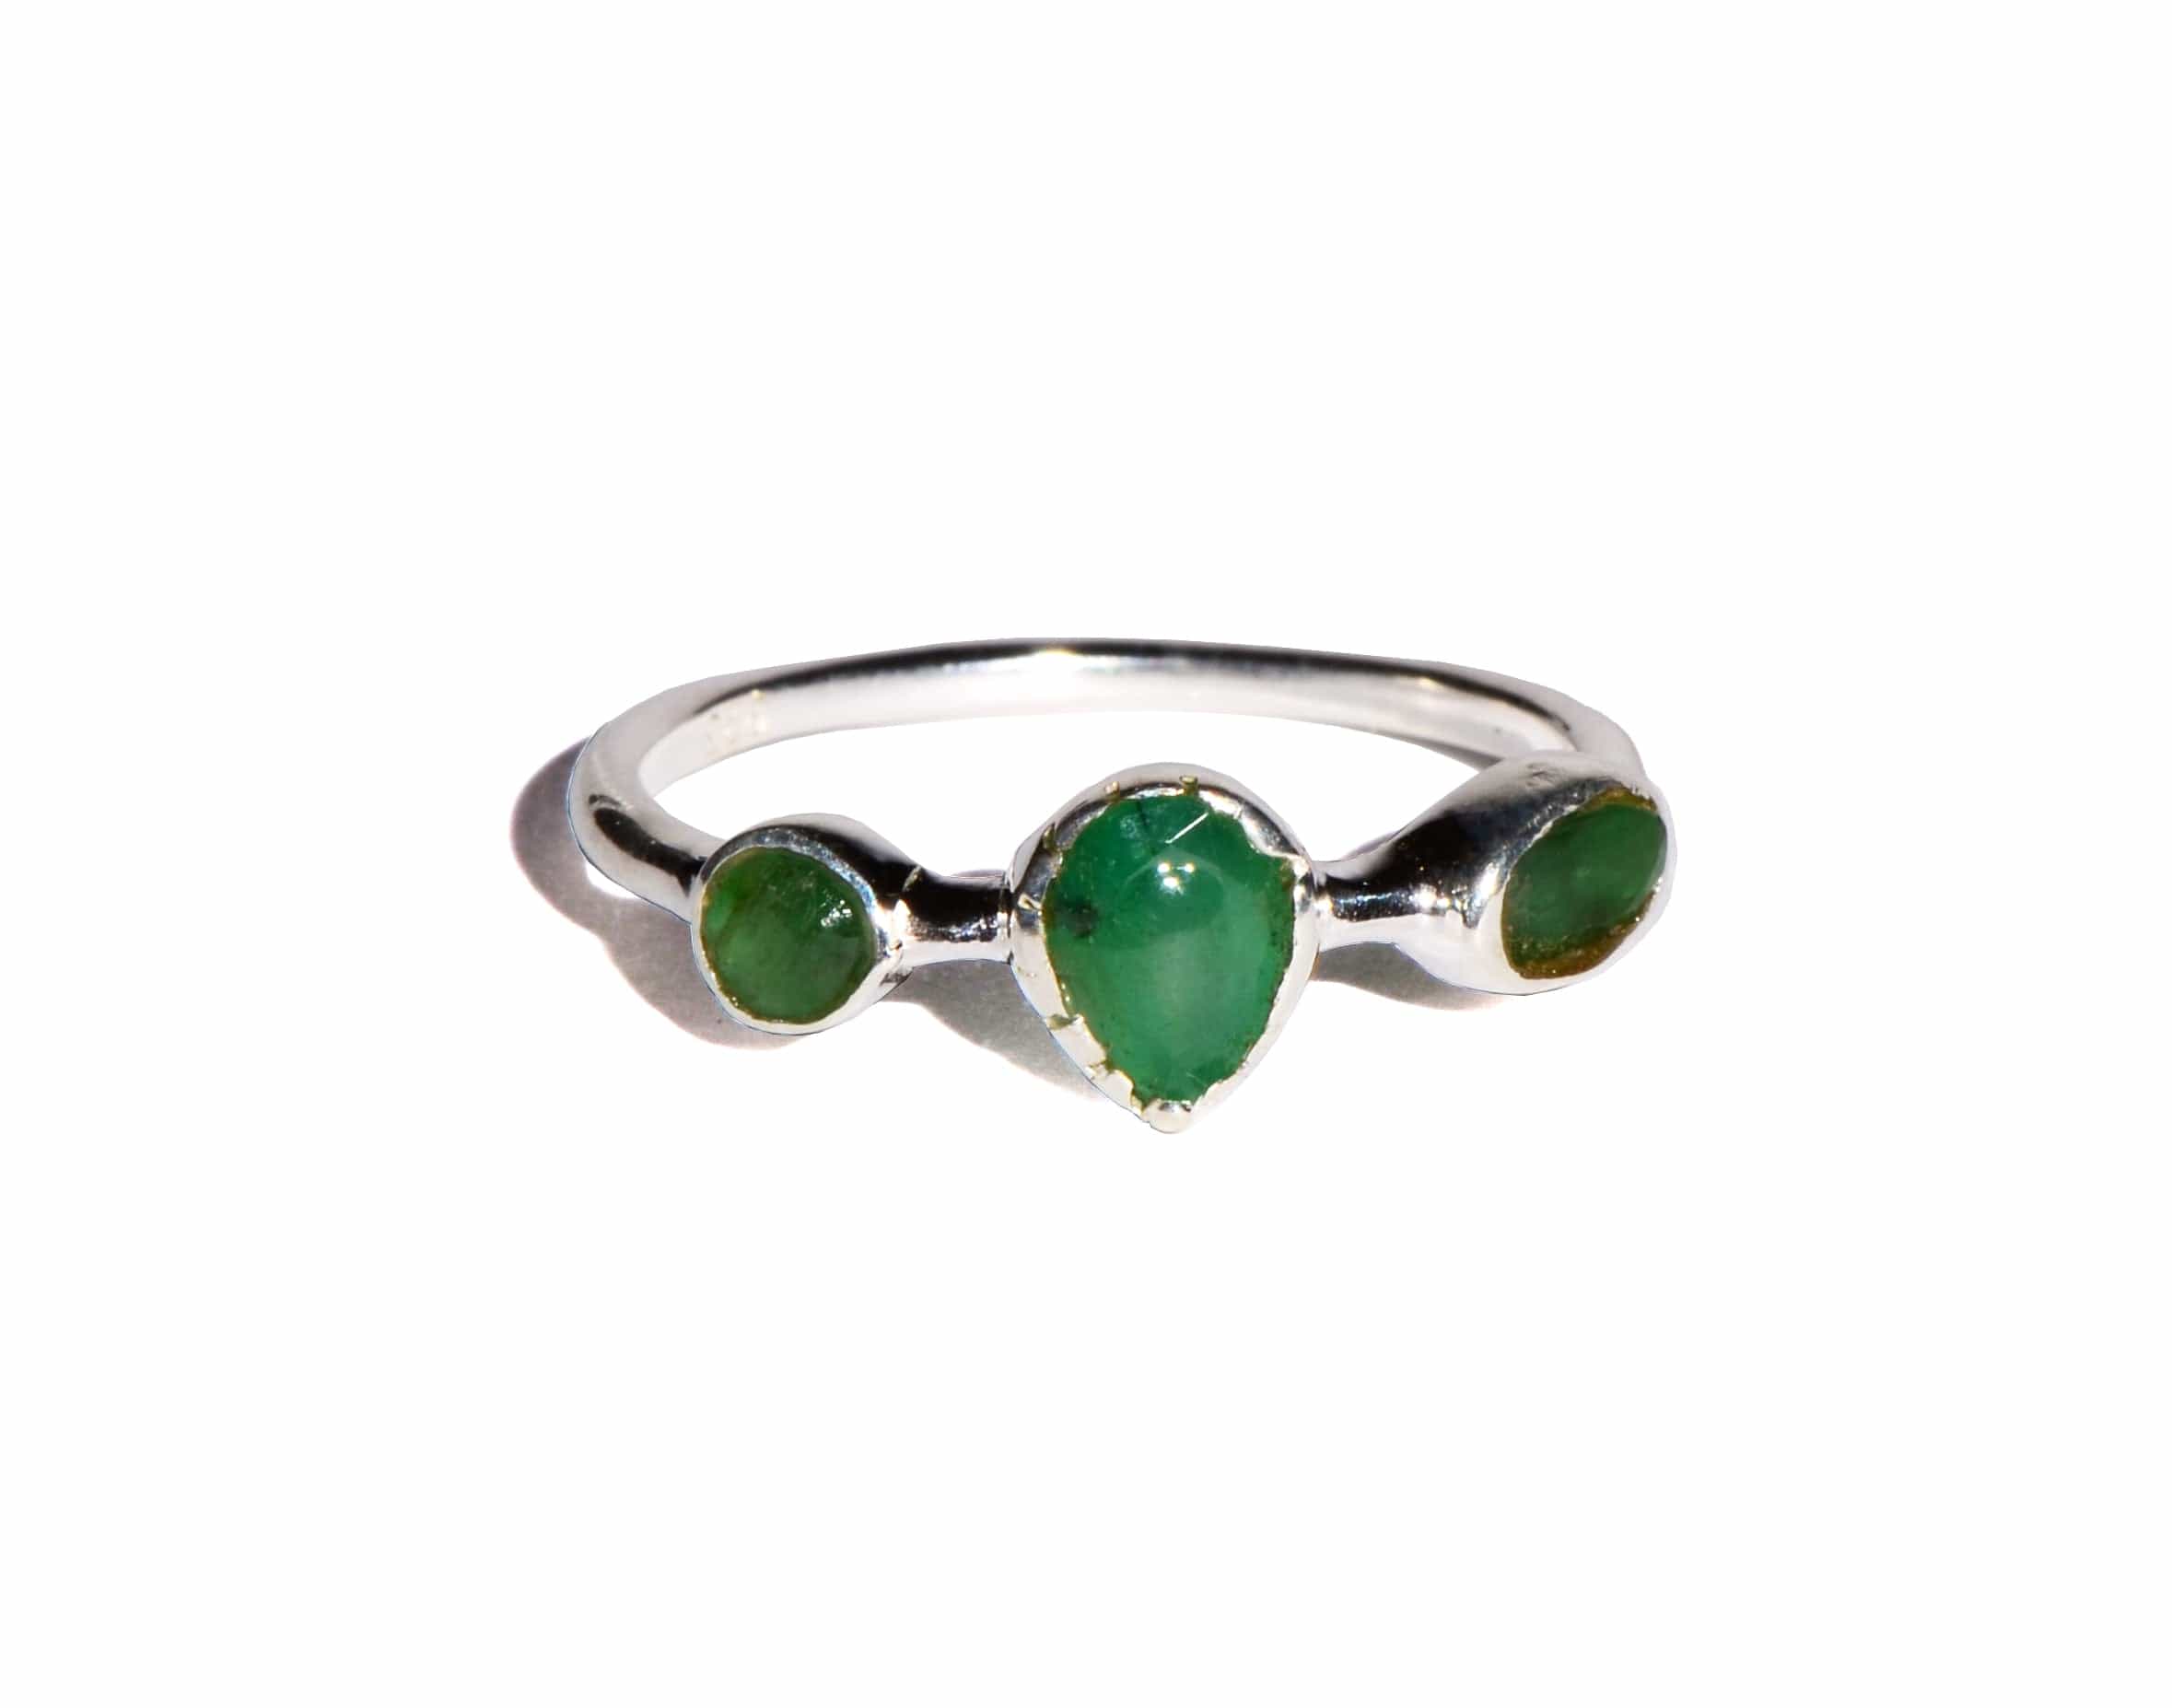 Buy Green onyx ring, Emerald green silver ring, Round faceted ring online  at aStudio1980.com